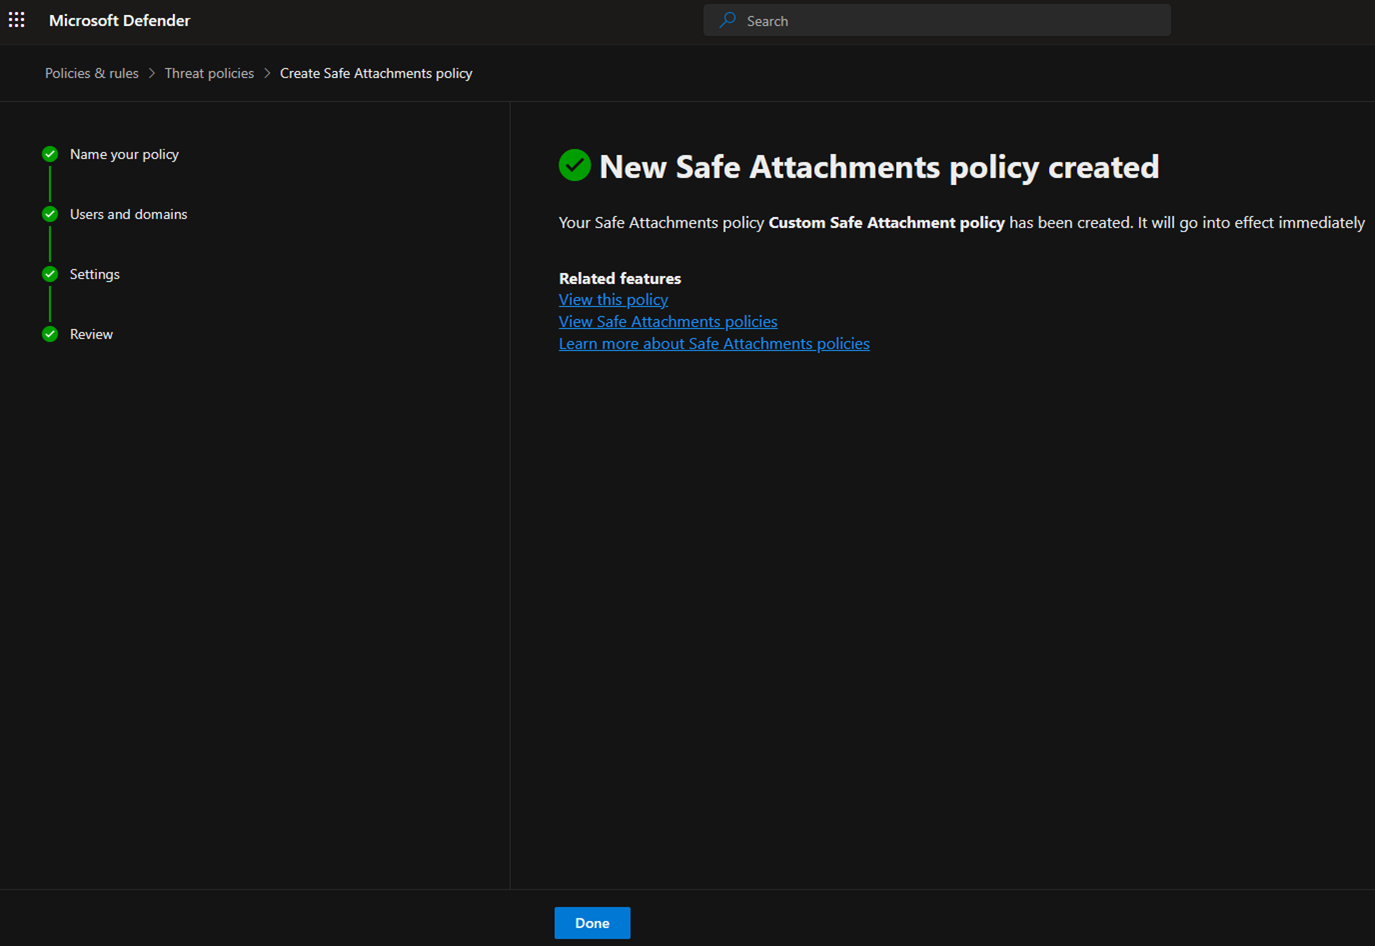 032124 2040 Howtocreate13 - How to create custom Safe Attachments policies in Microsoft Defender for Office 365